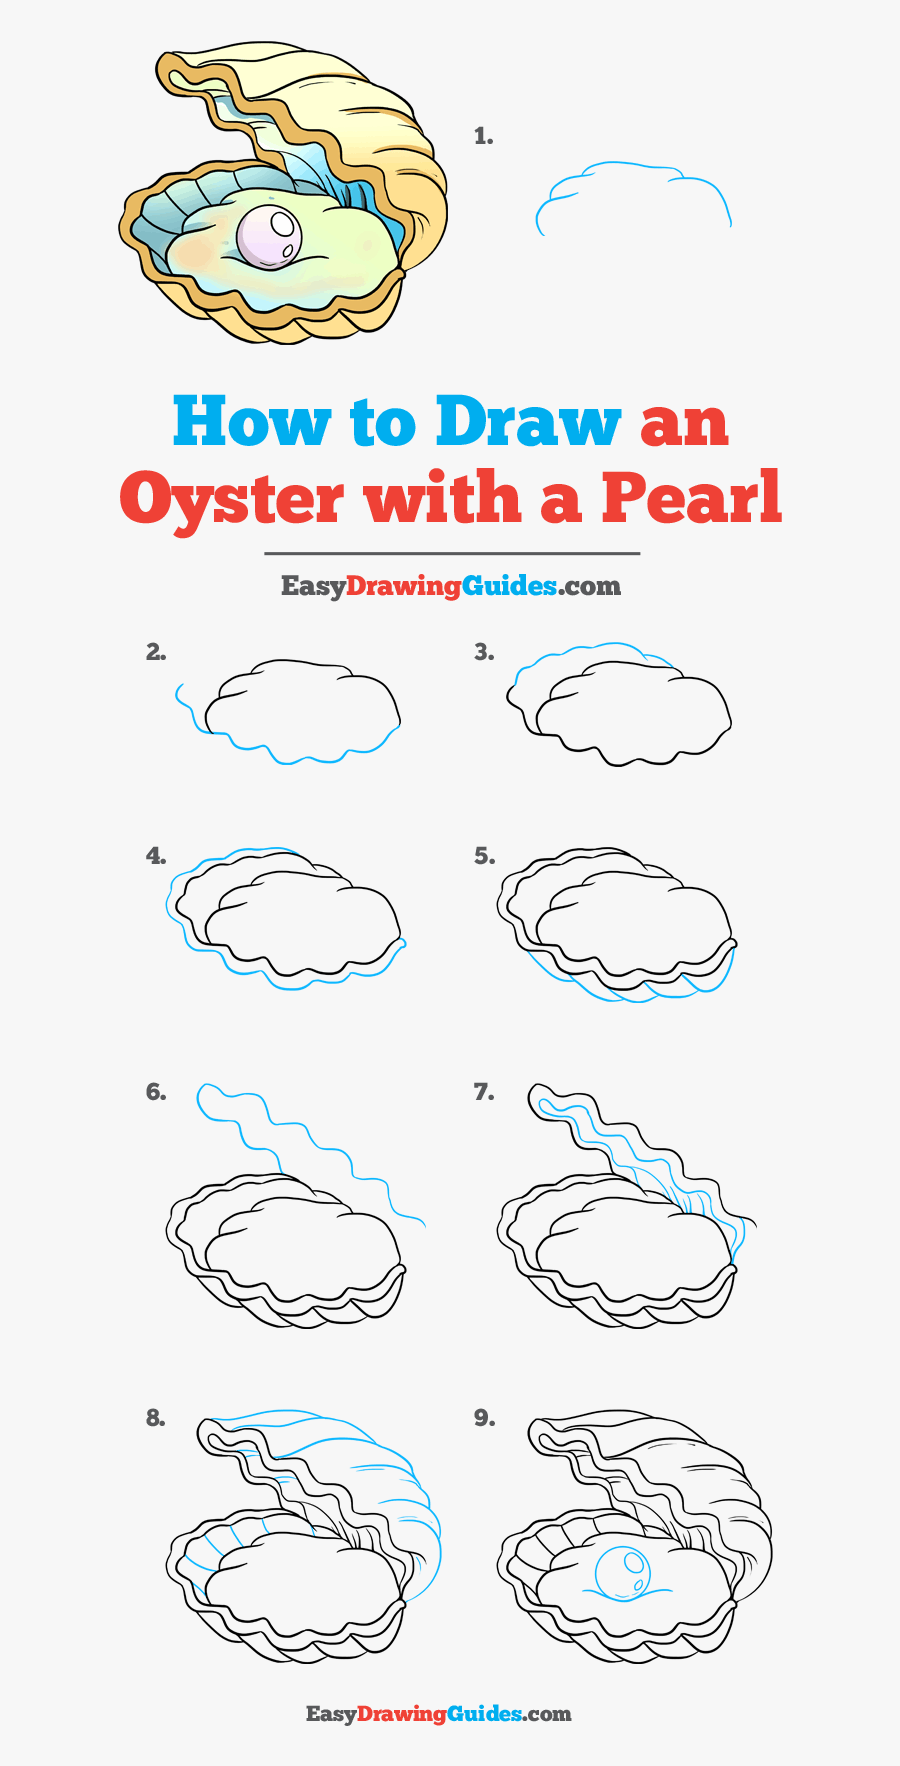 How To Draw Oyster With A Pearl - Draw A Pearl In An Oyster Step, Transparent Clipart